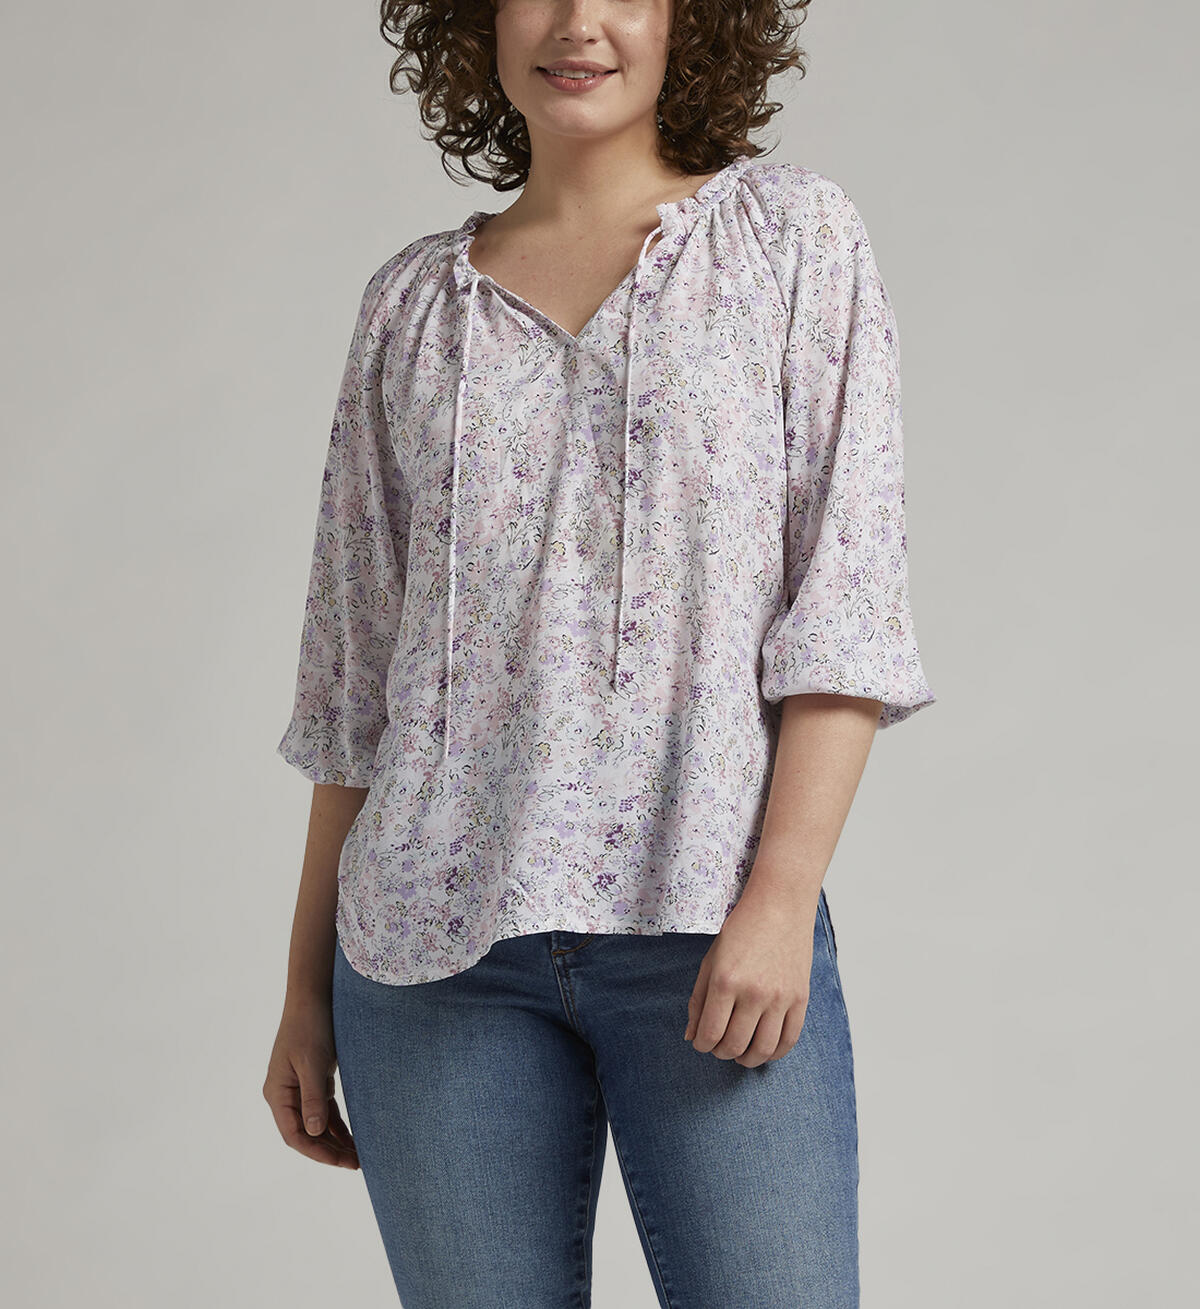 Ruffle Tie Neck Blouse, , hi-res image number 0